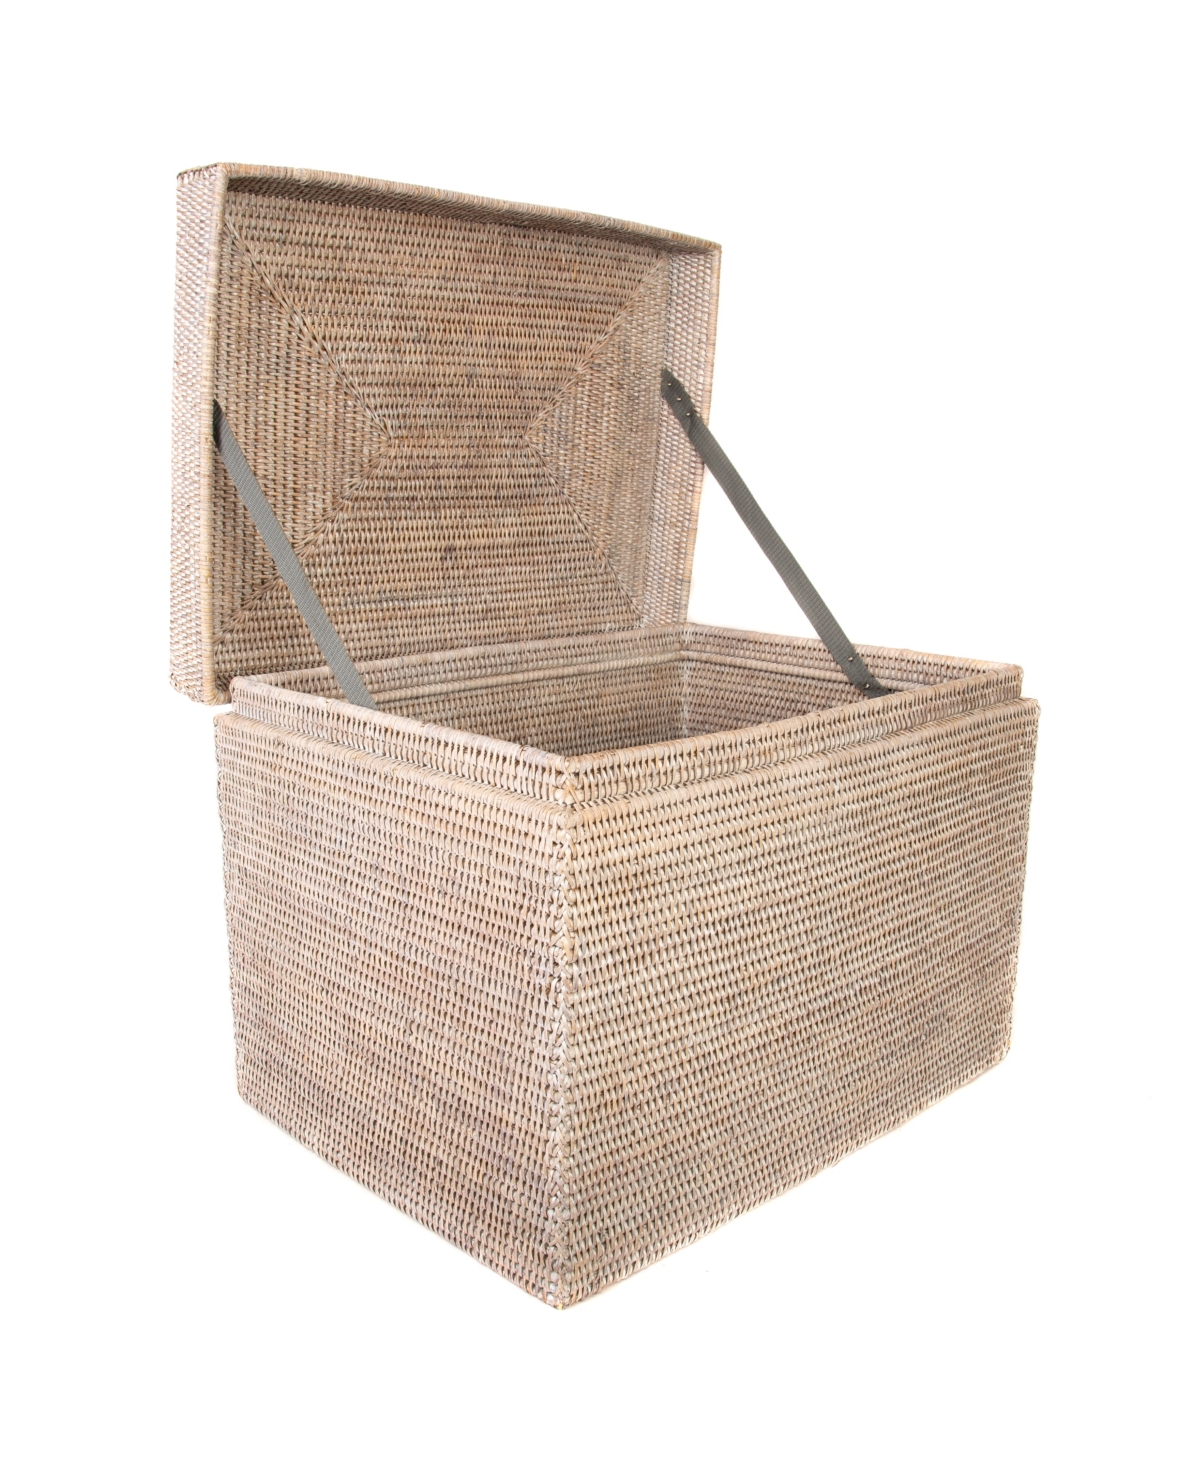 Artifacts Trading Company Artifacts Rattan Rectangular Hinged Chest In Off-white